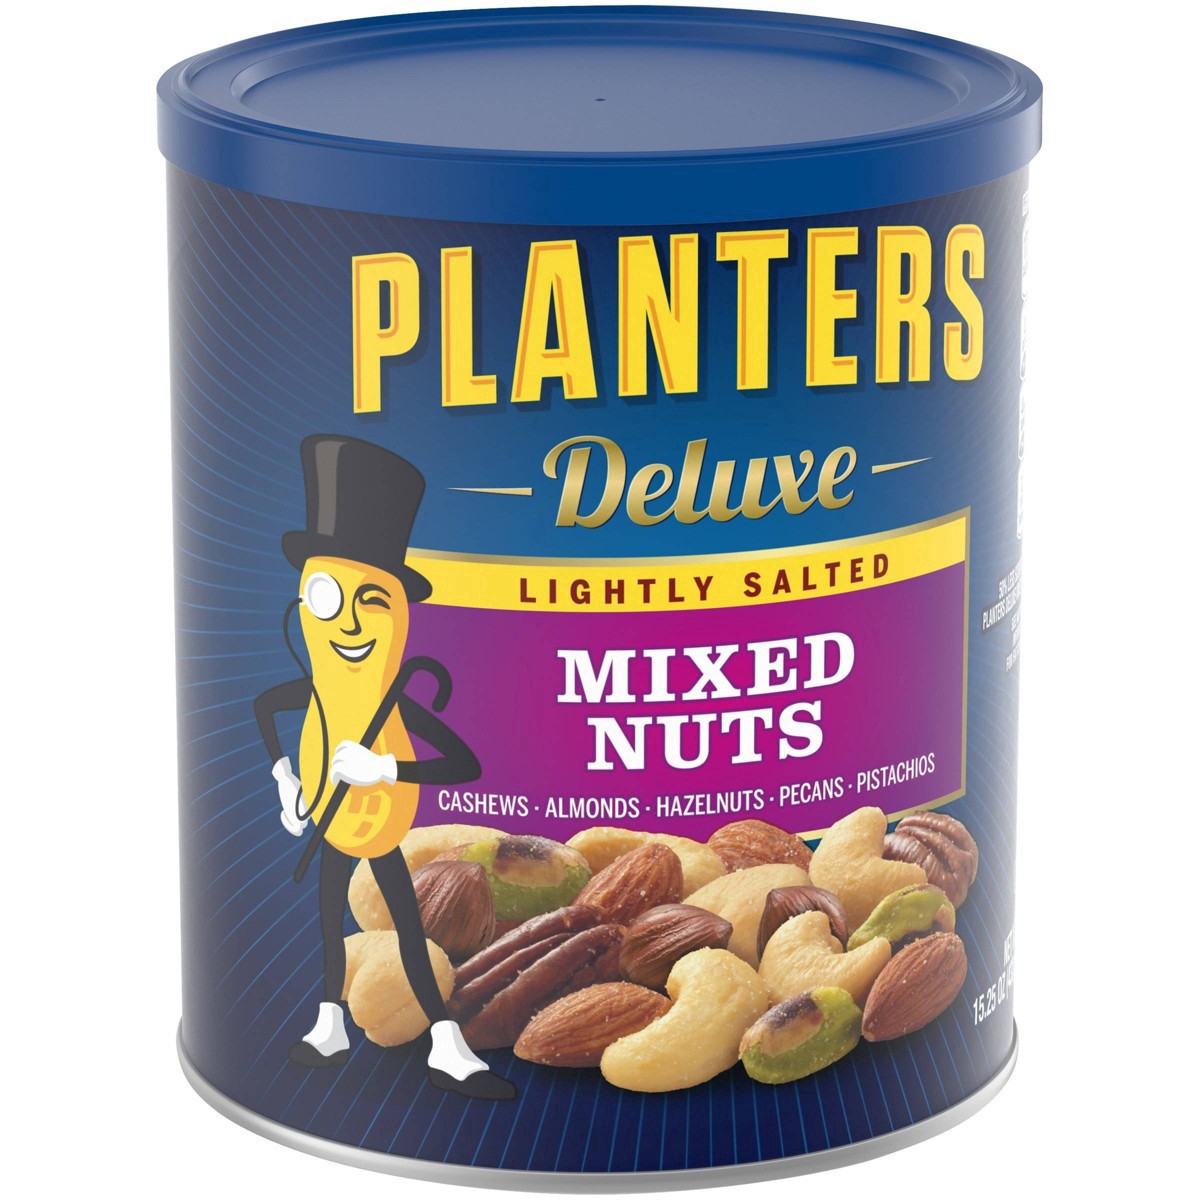 slide 10 of 46, Planters Deluxe Lightly Salted Mixed Nuts 15.25 oz, 15.25 oz